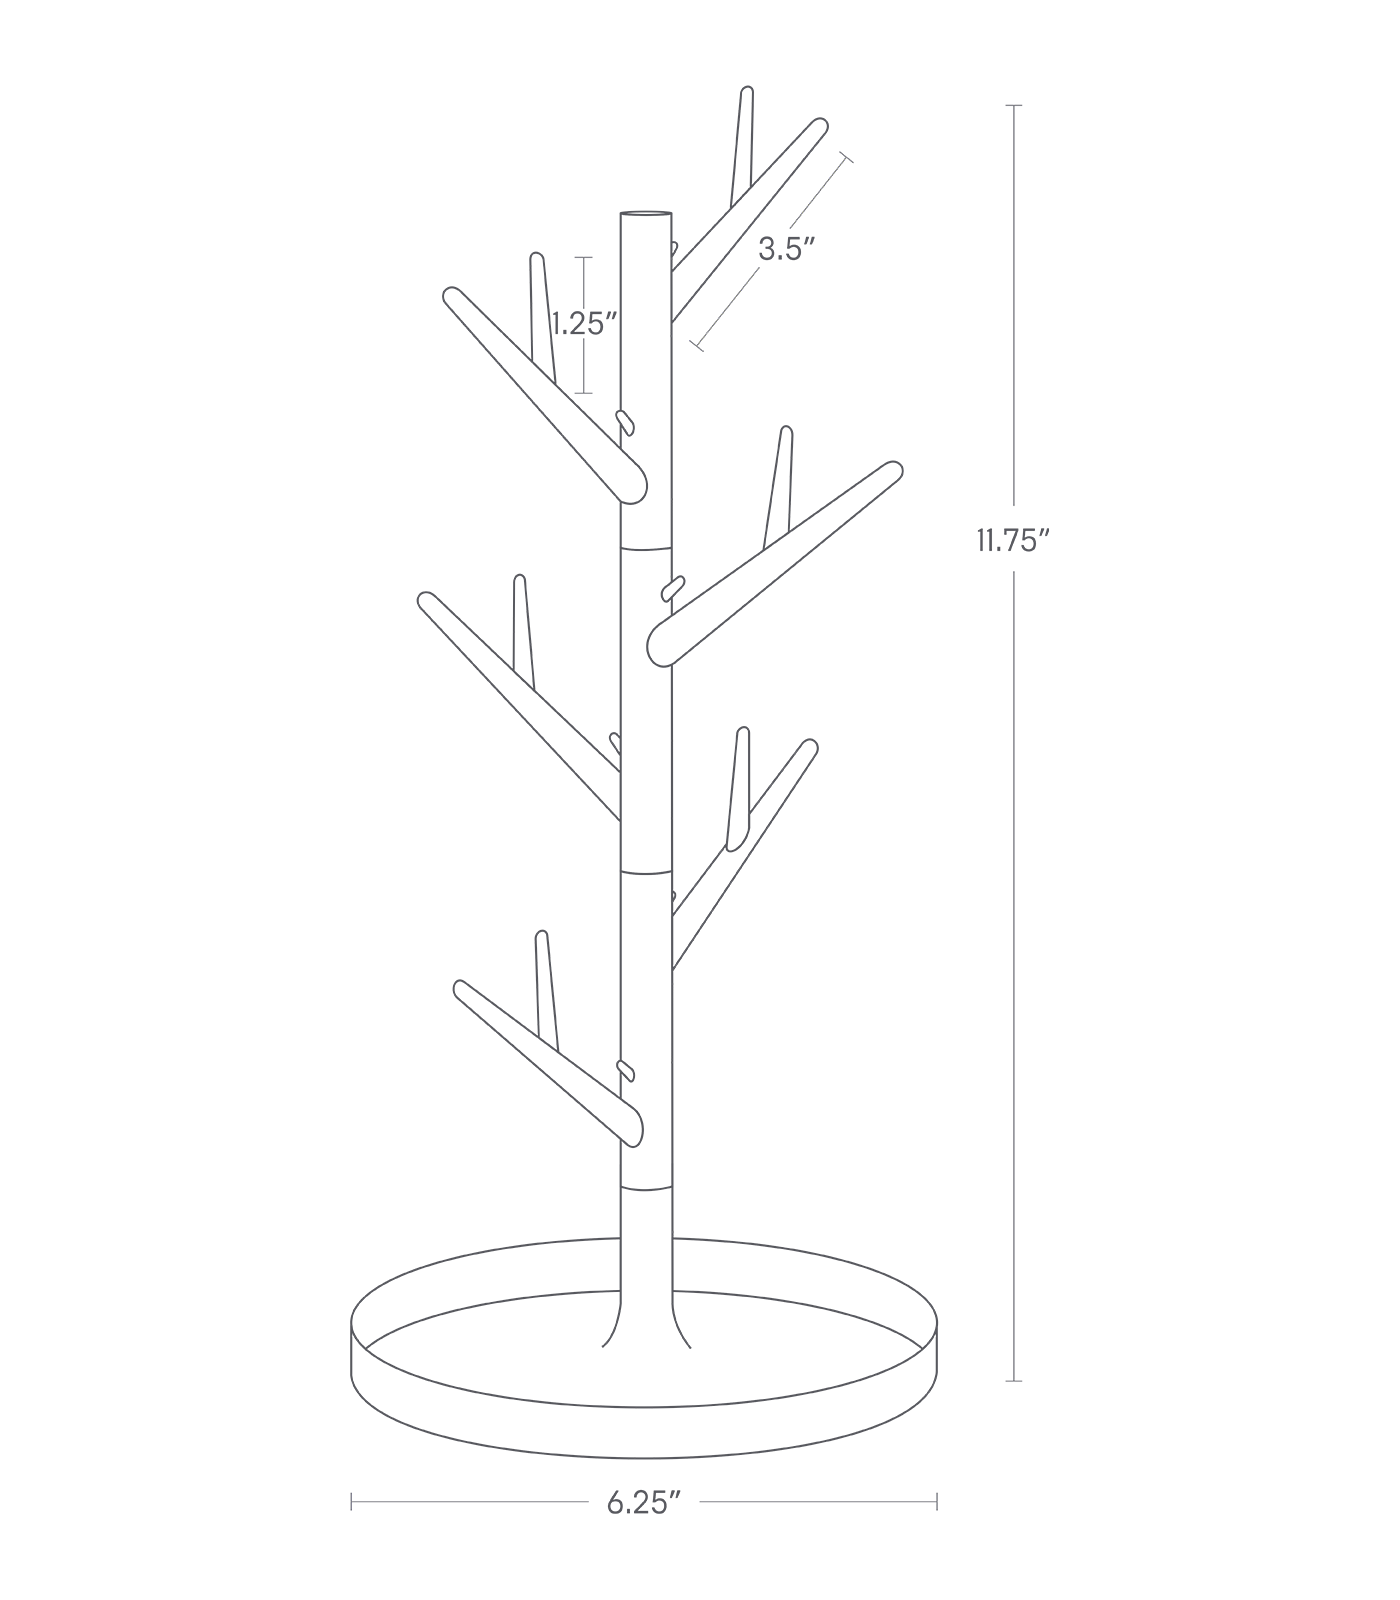 Dimension Image for Mug Tree on a white background showing height of 11.75